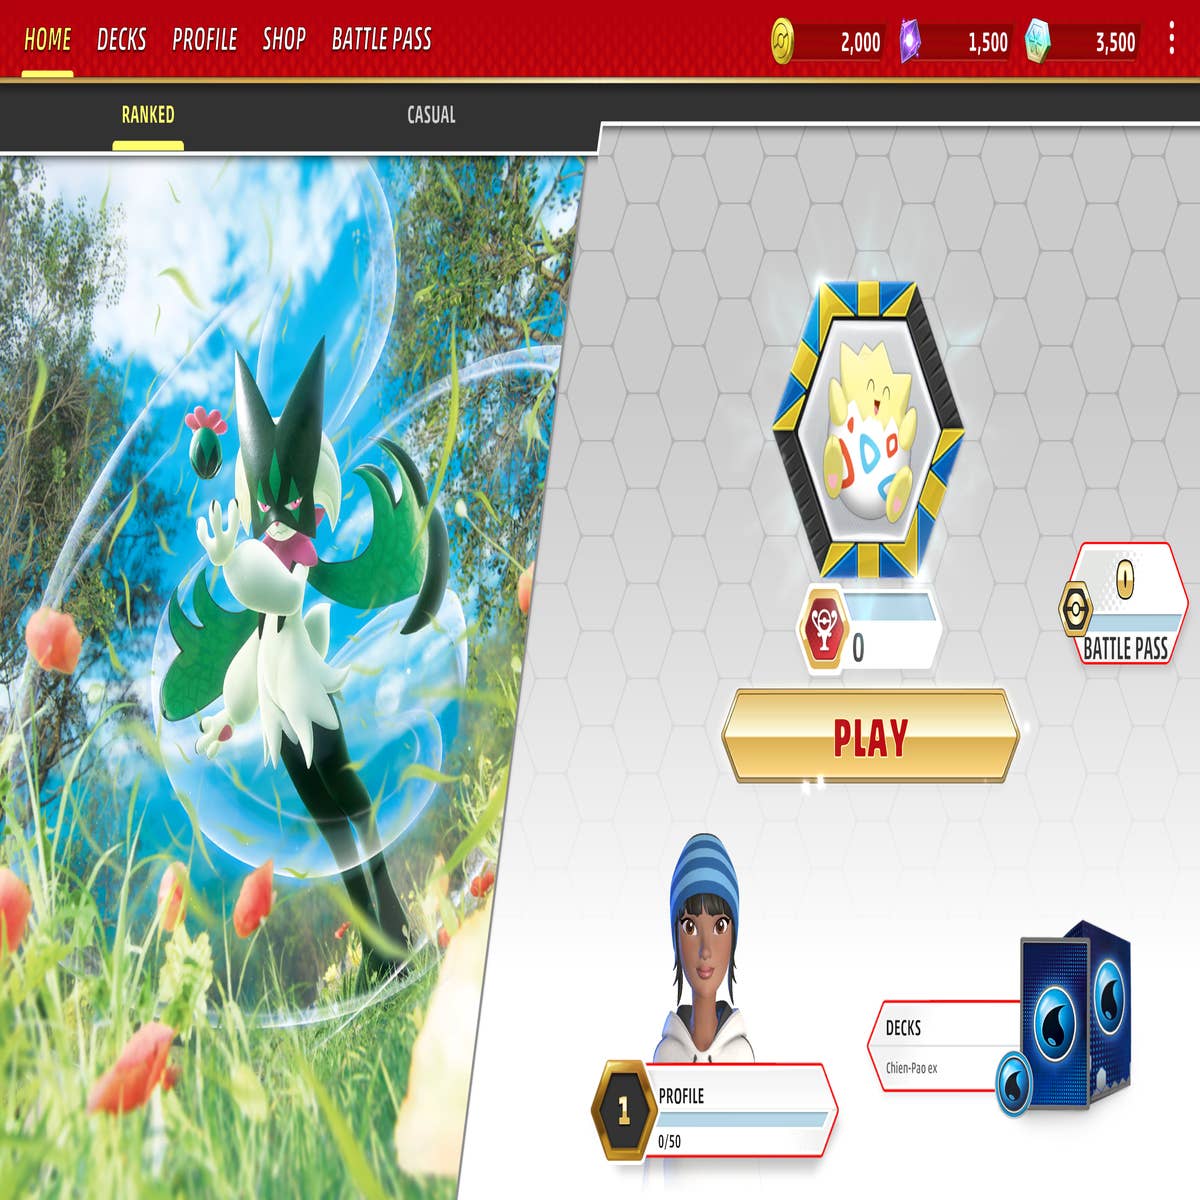 Pokémon TCG Live: Everything you need to know, and how to get